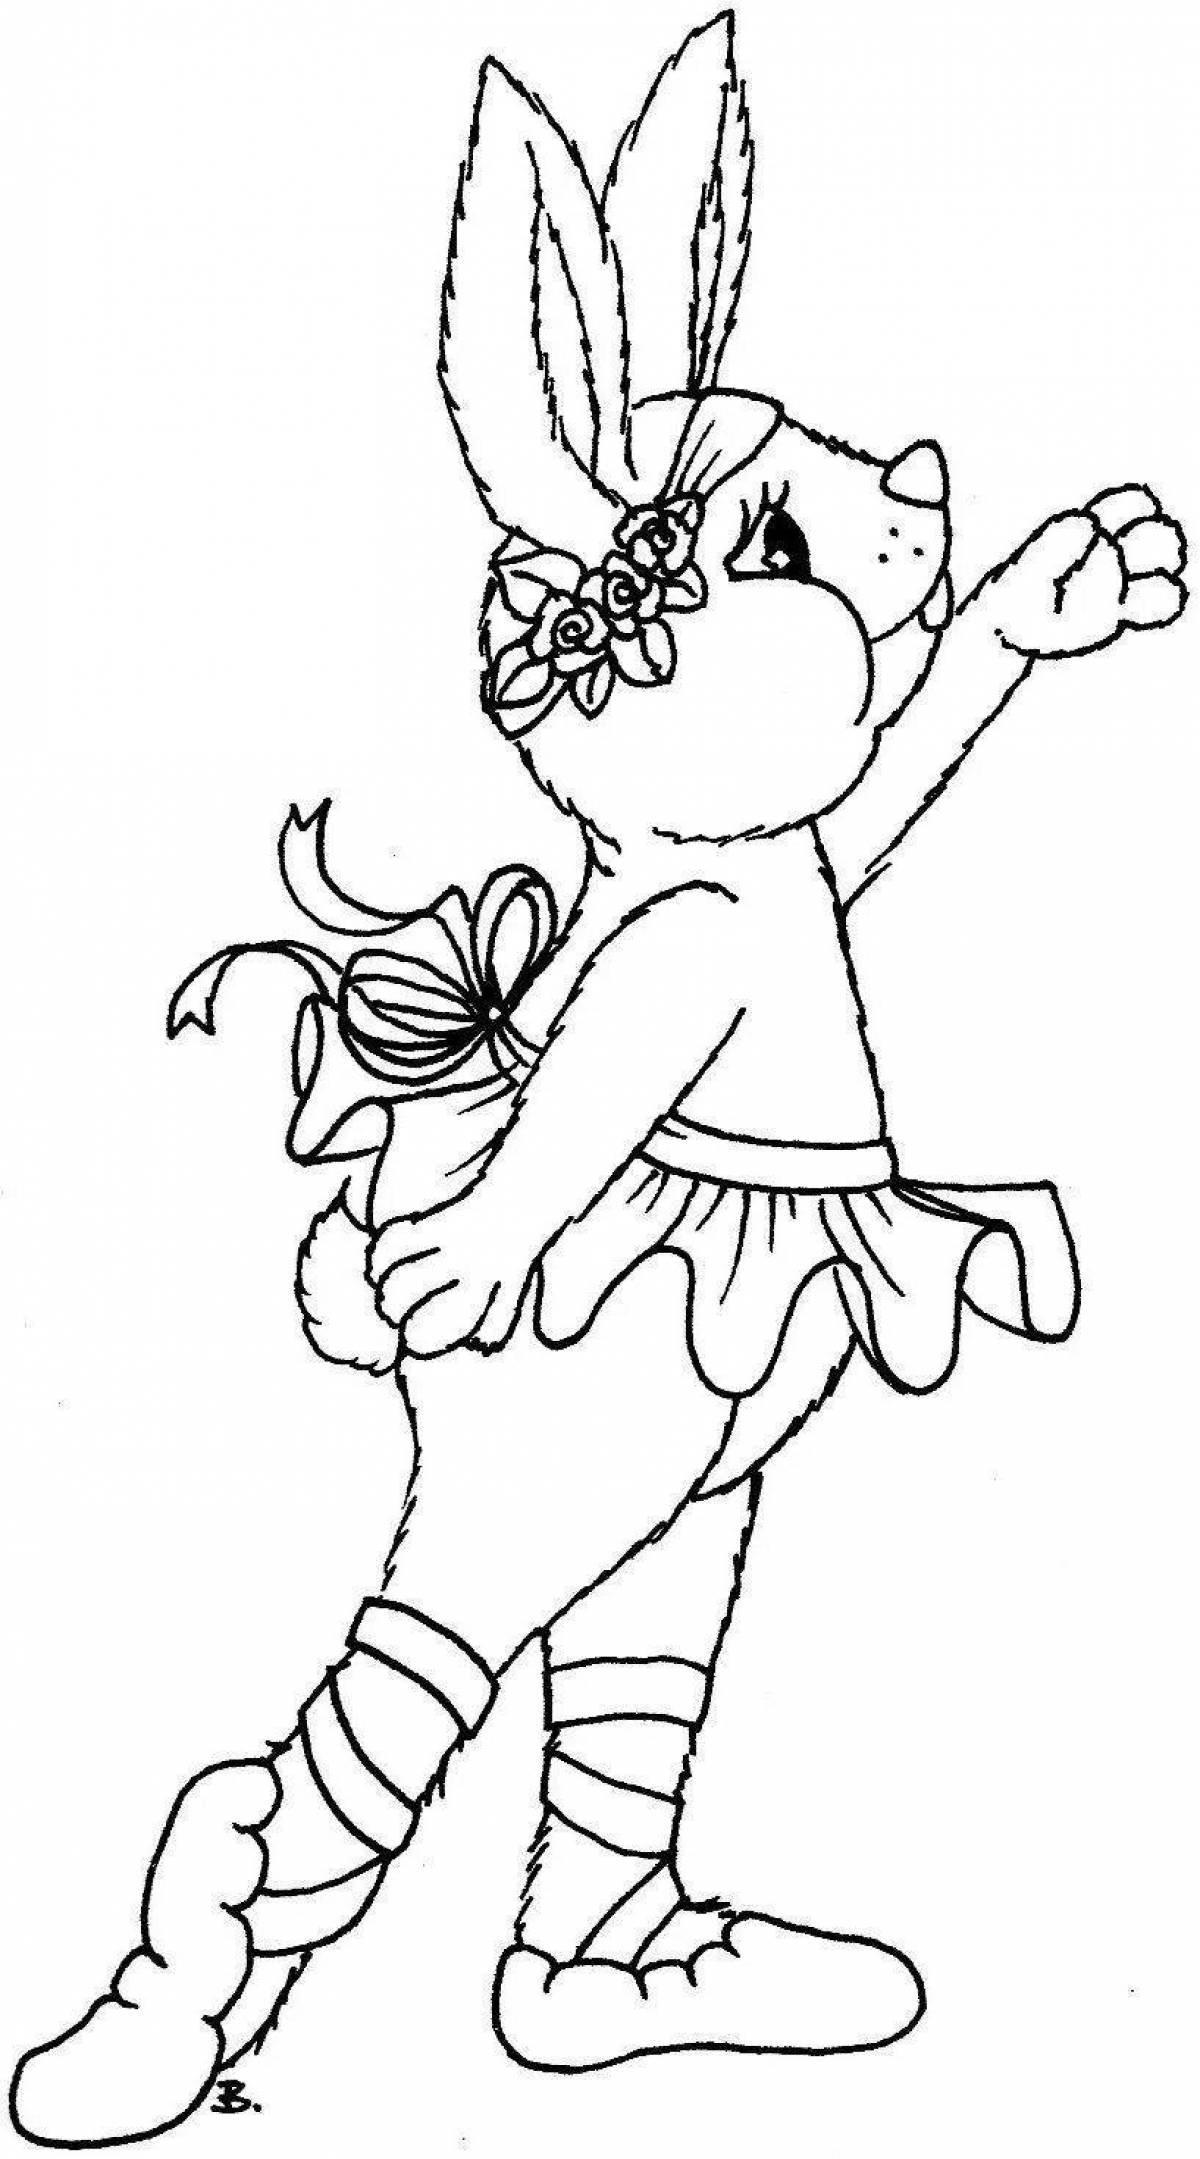 Coloring page playful ballerina cat